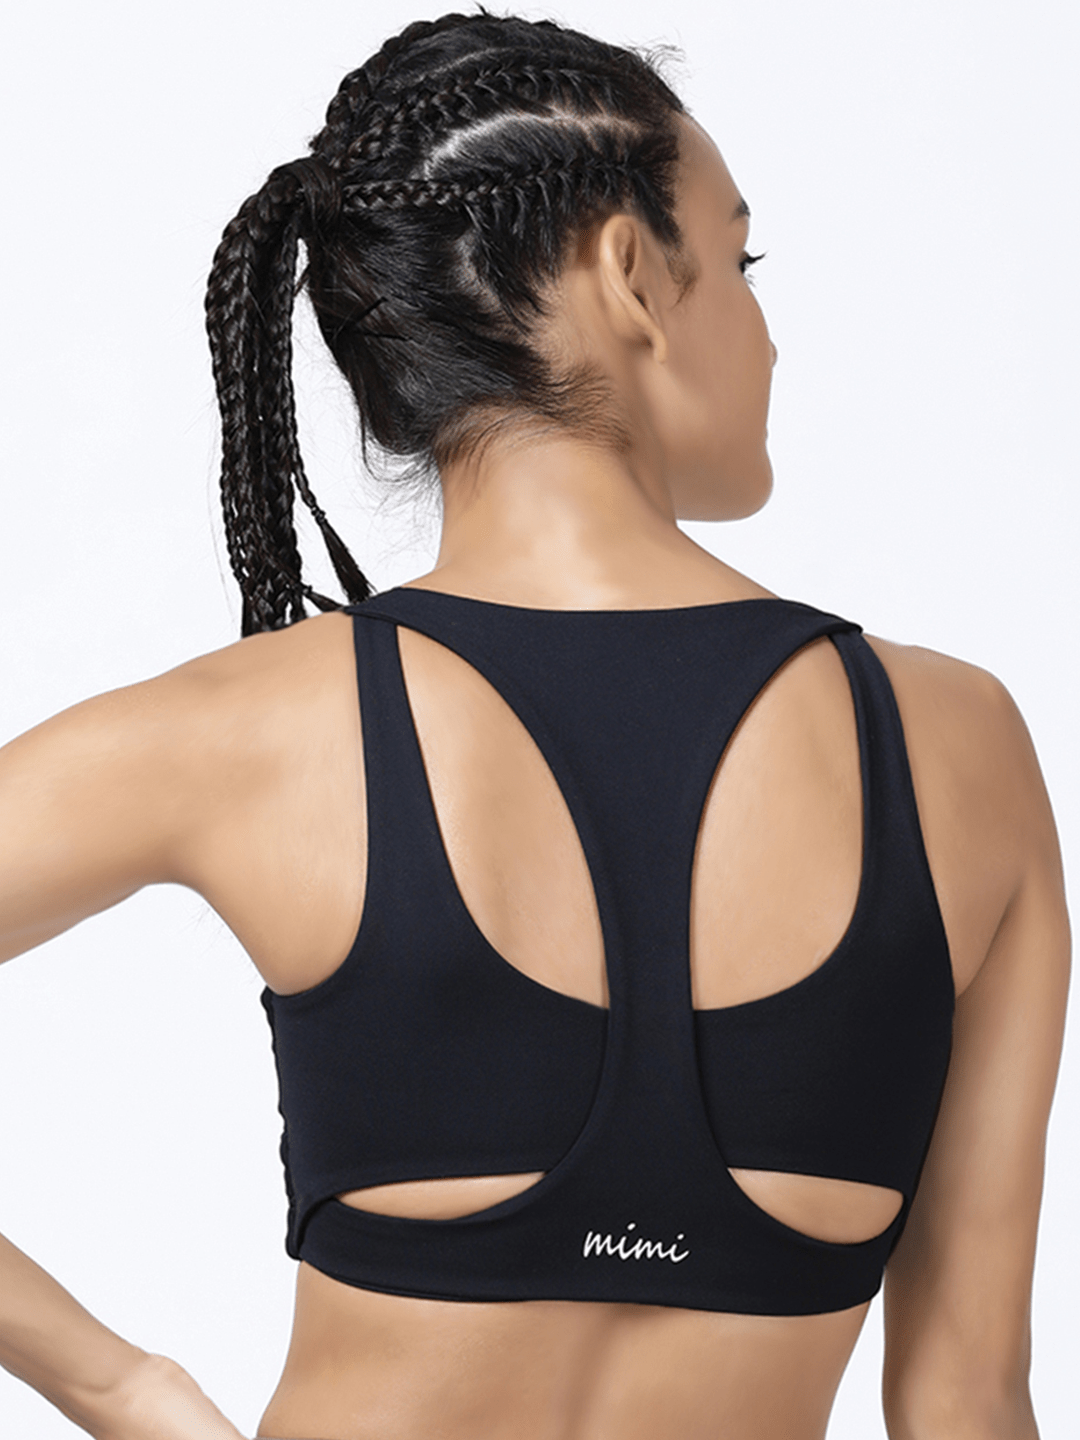 Black Friday Deals 2022 TIMIFIS Racerback Sports Bras for Women